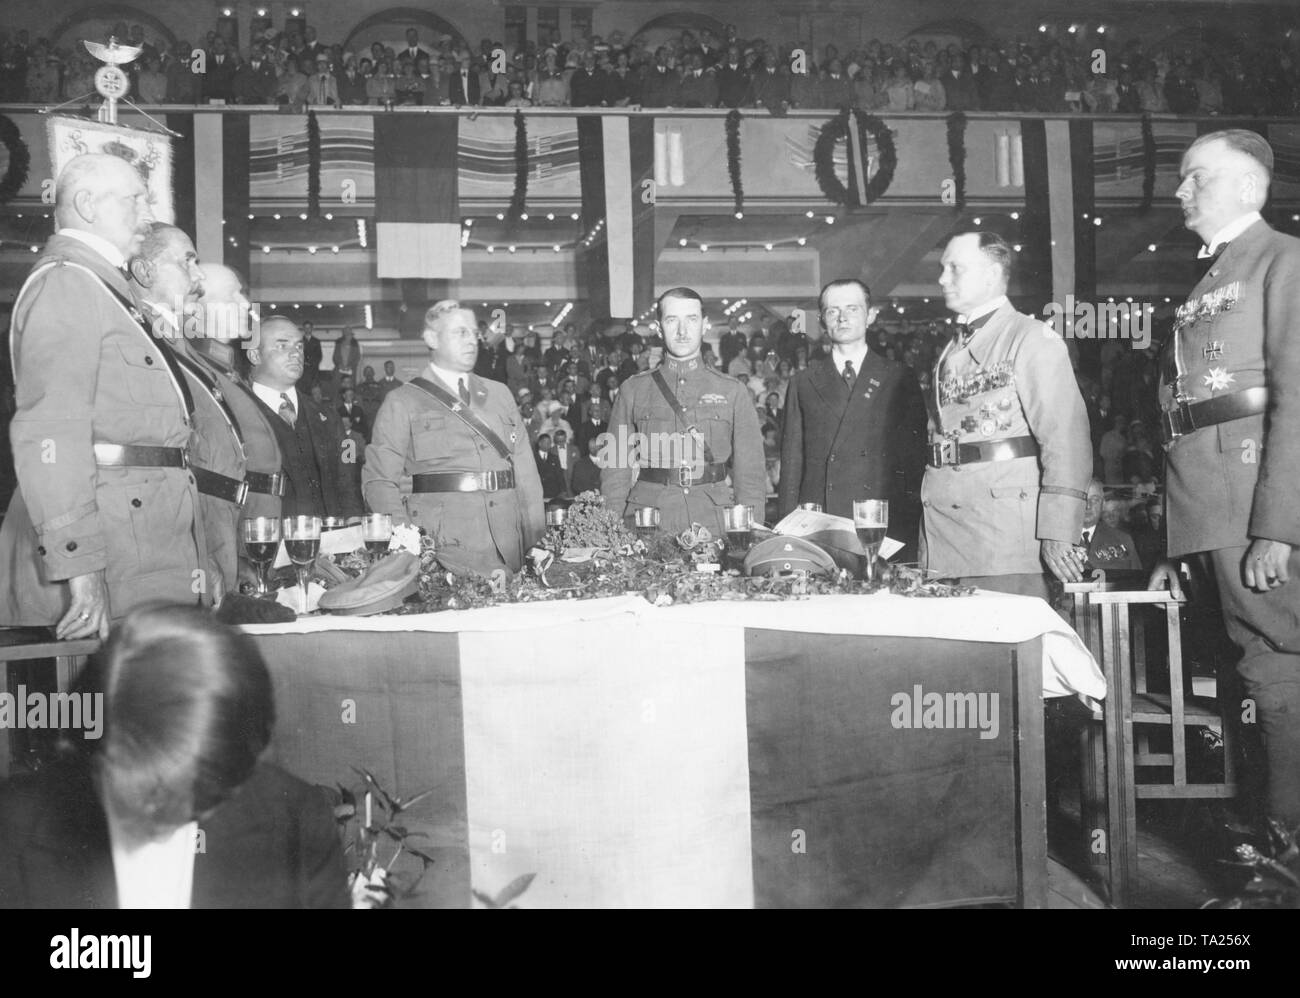 Prominent German ocean fliers and transatlantic aviators are honored by the leadership of the Stahlhelm at an event with 11,000 participants in Berlin's Sportpalast. Rear row from left to right: Captain Hermann Koehl (in civilian), Stahlhelm leader Franz Seldte, Major James C. Fitzmaurice, Ehrenfried Guenther Freiherr von Huenefeld, and the Stahlhelm Major von Stephani. Stock Photo